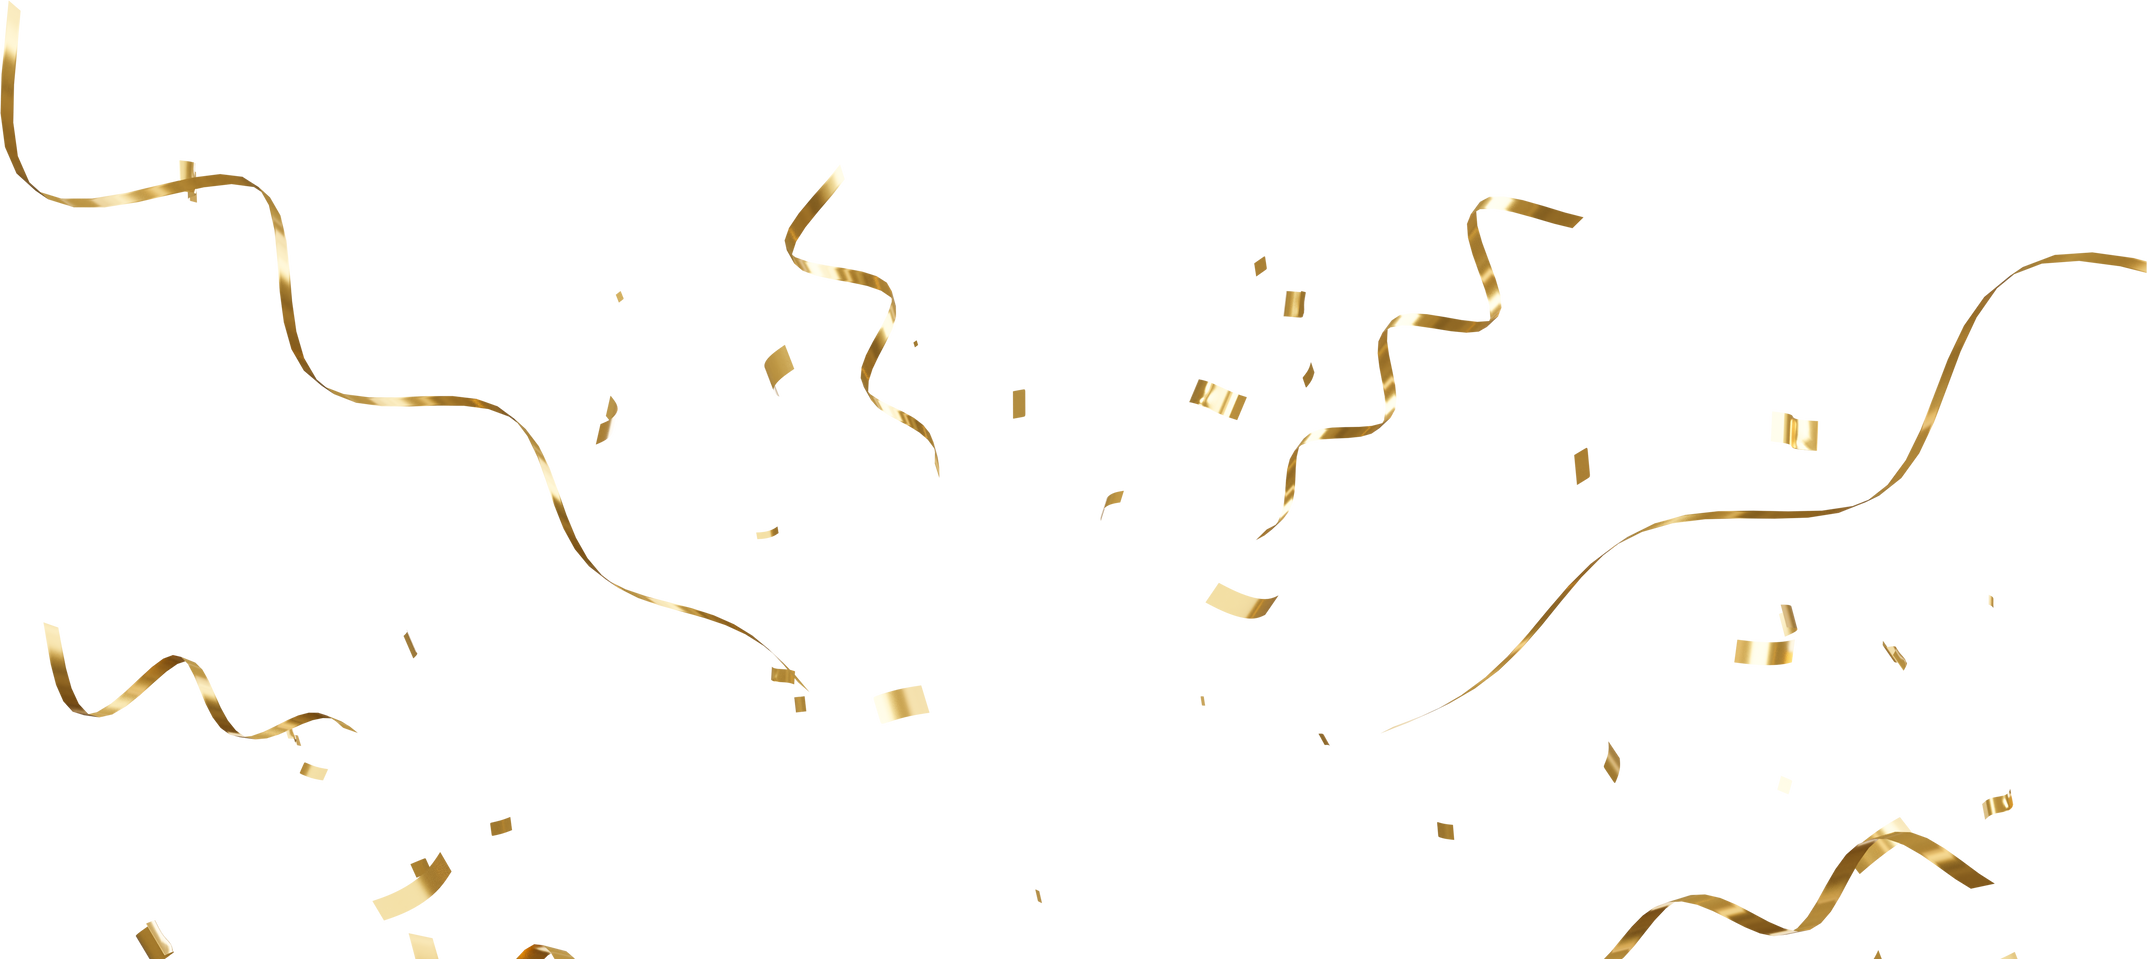 Floating Gold Confetti